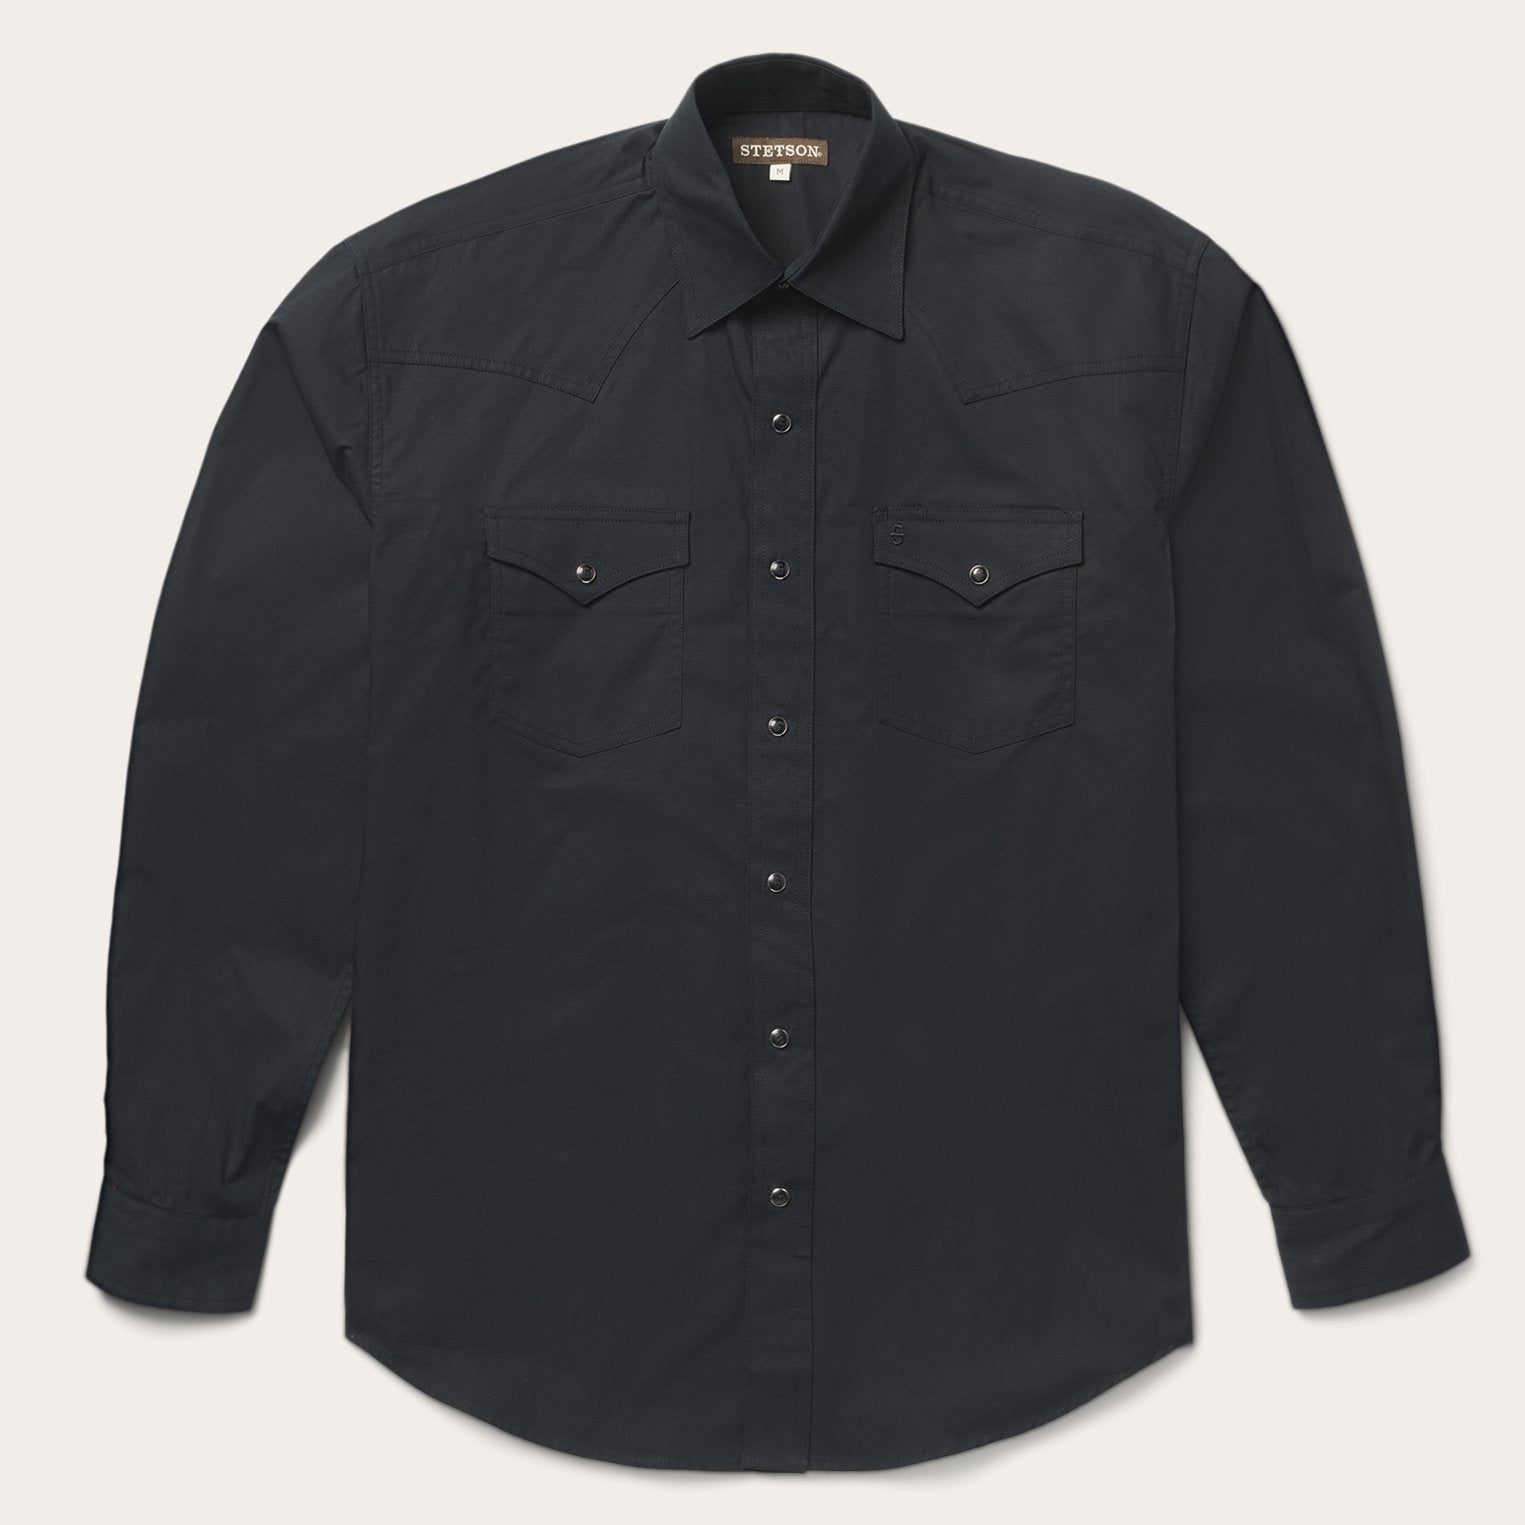 Stetson Men's Long Sleeve Solid Pearl Snap Western Shirt - Black